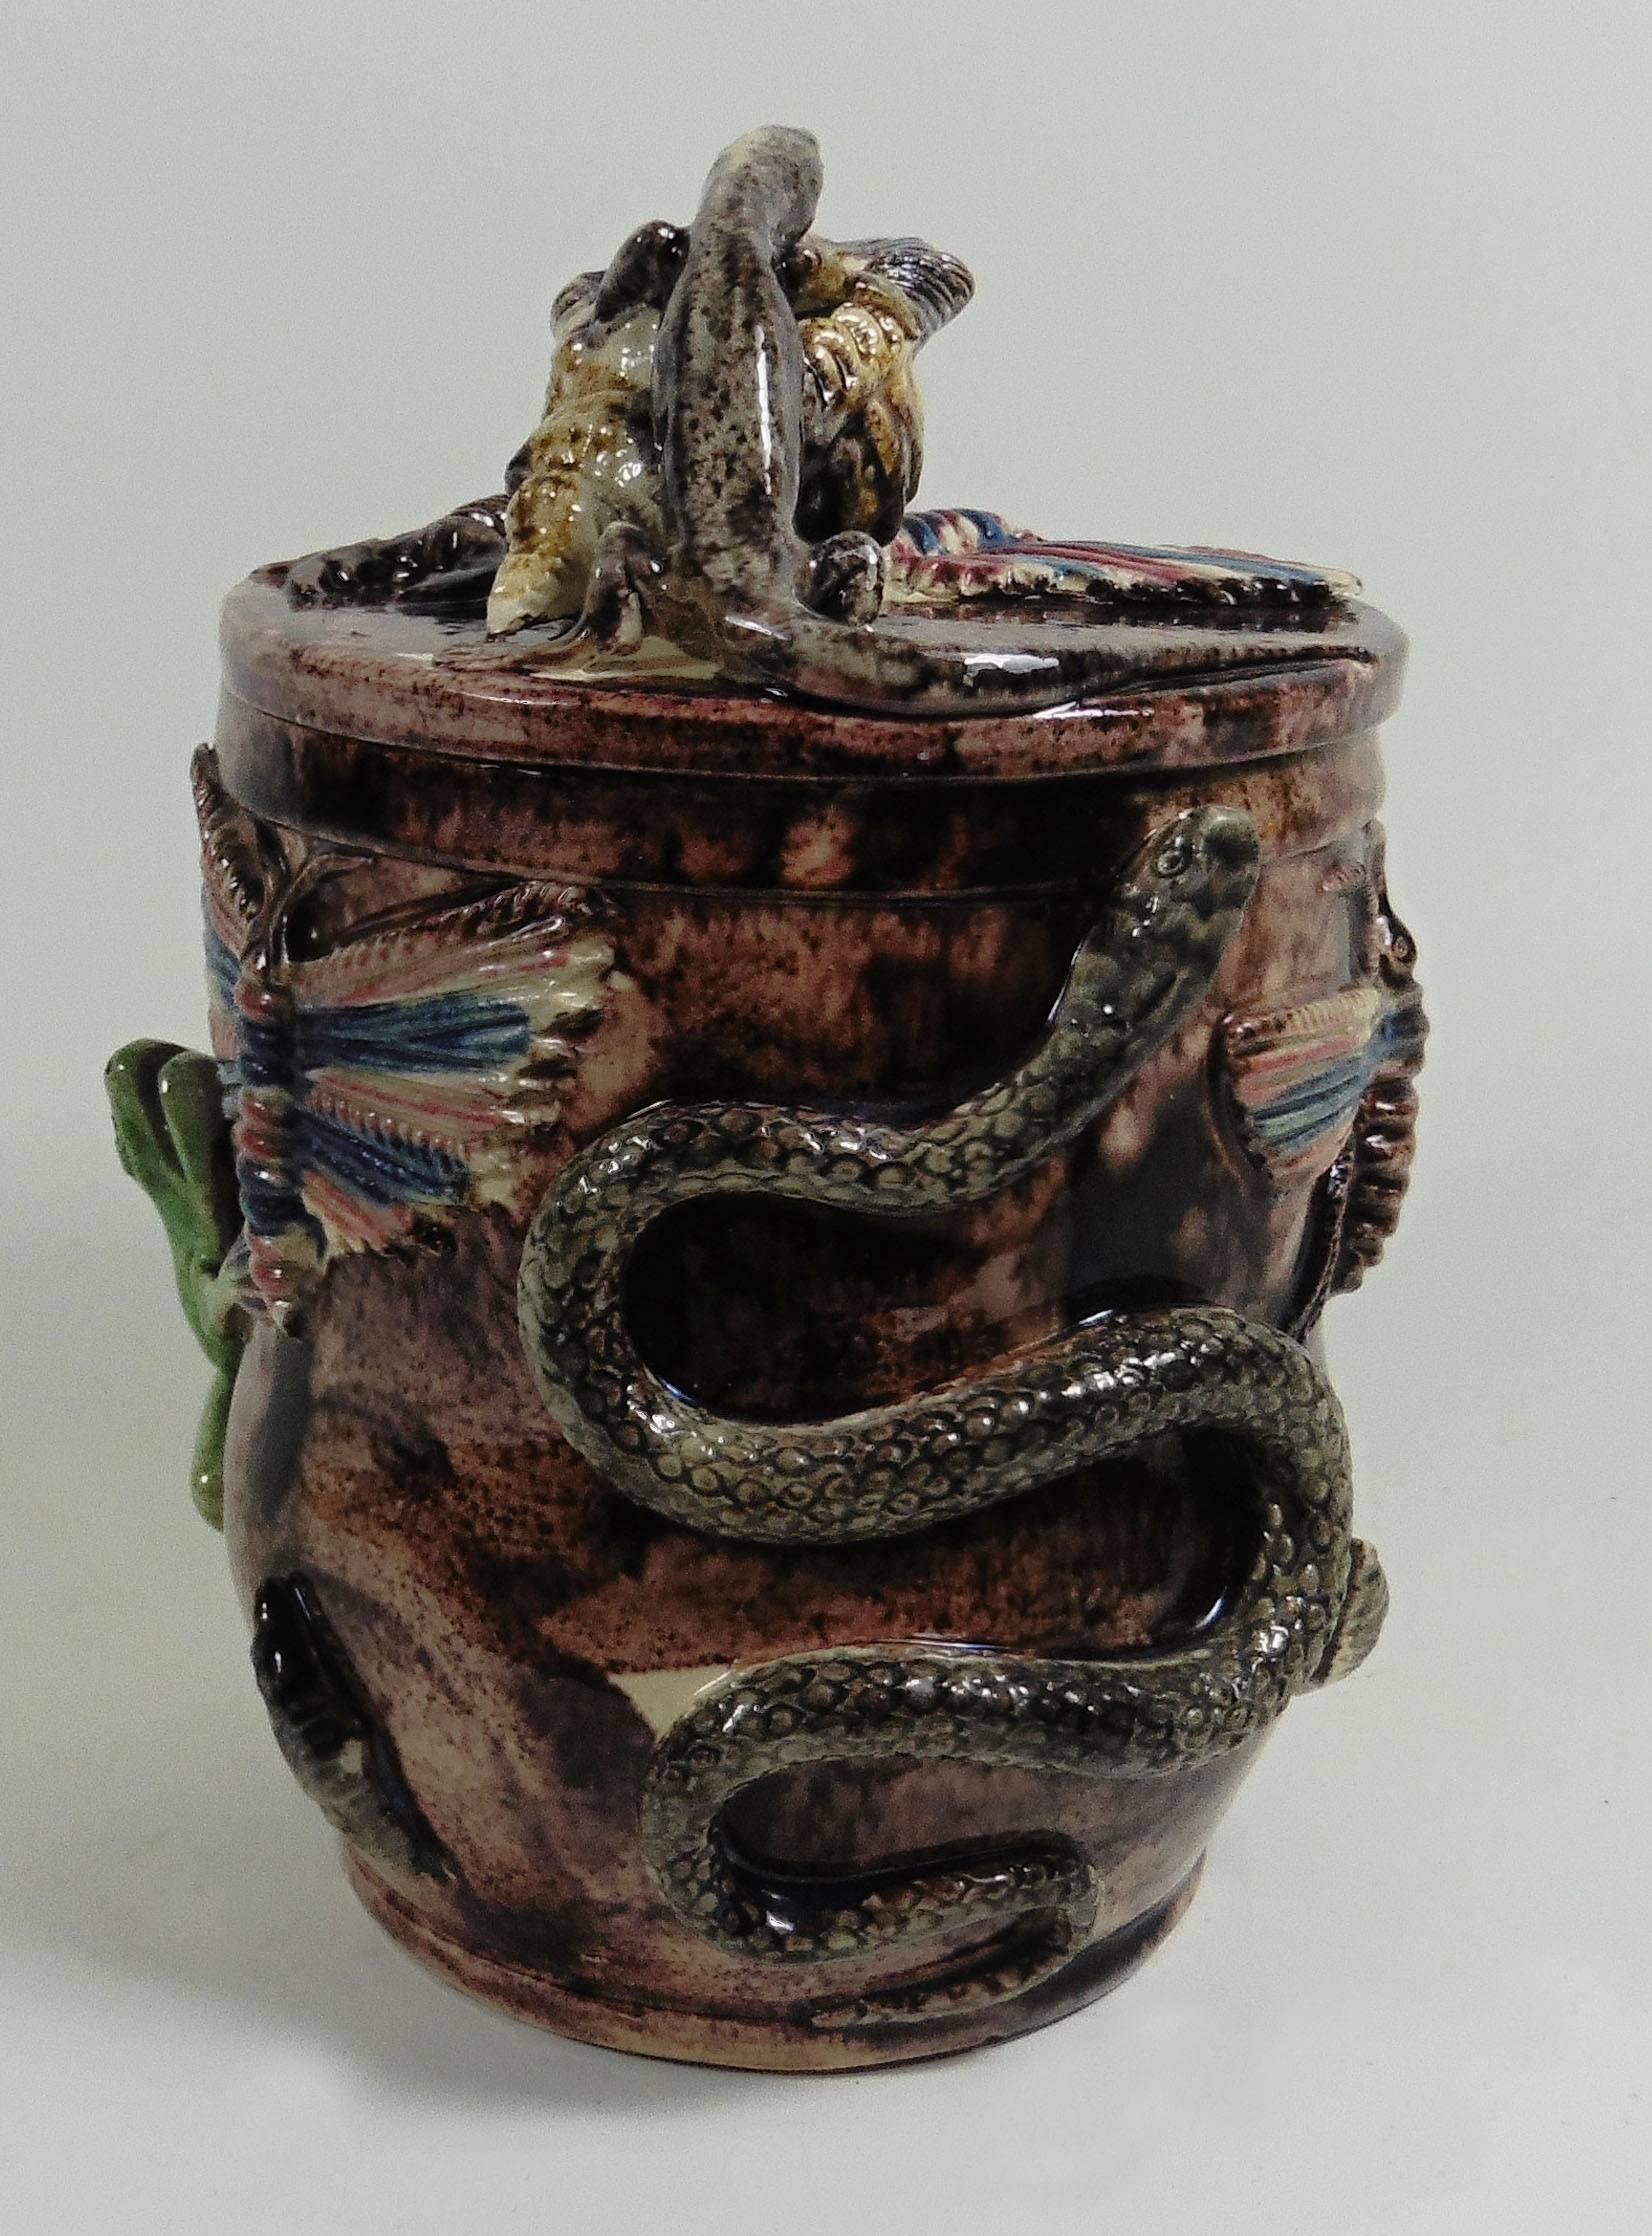 Large Portuguese Palissy tobacco jar attributed to Manuel Mafra.
This tobacco jar is decorated in high relief of a frog, large butterflies, bugs, shells, a snake, a crocodile, on the lid a large shell with a lizard on the top, a butterfly and a